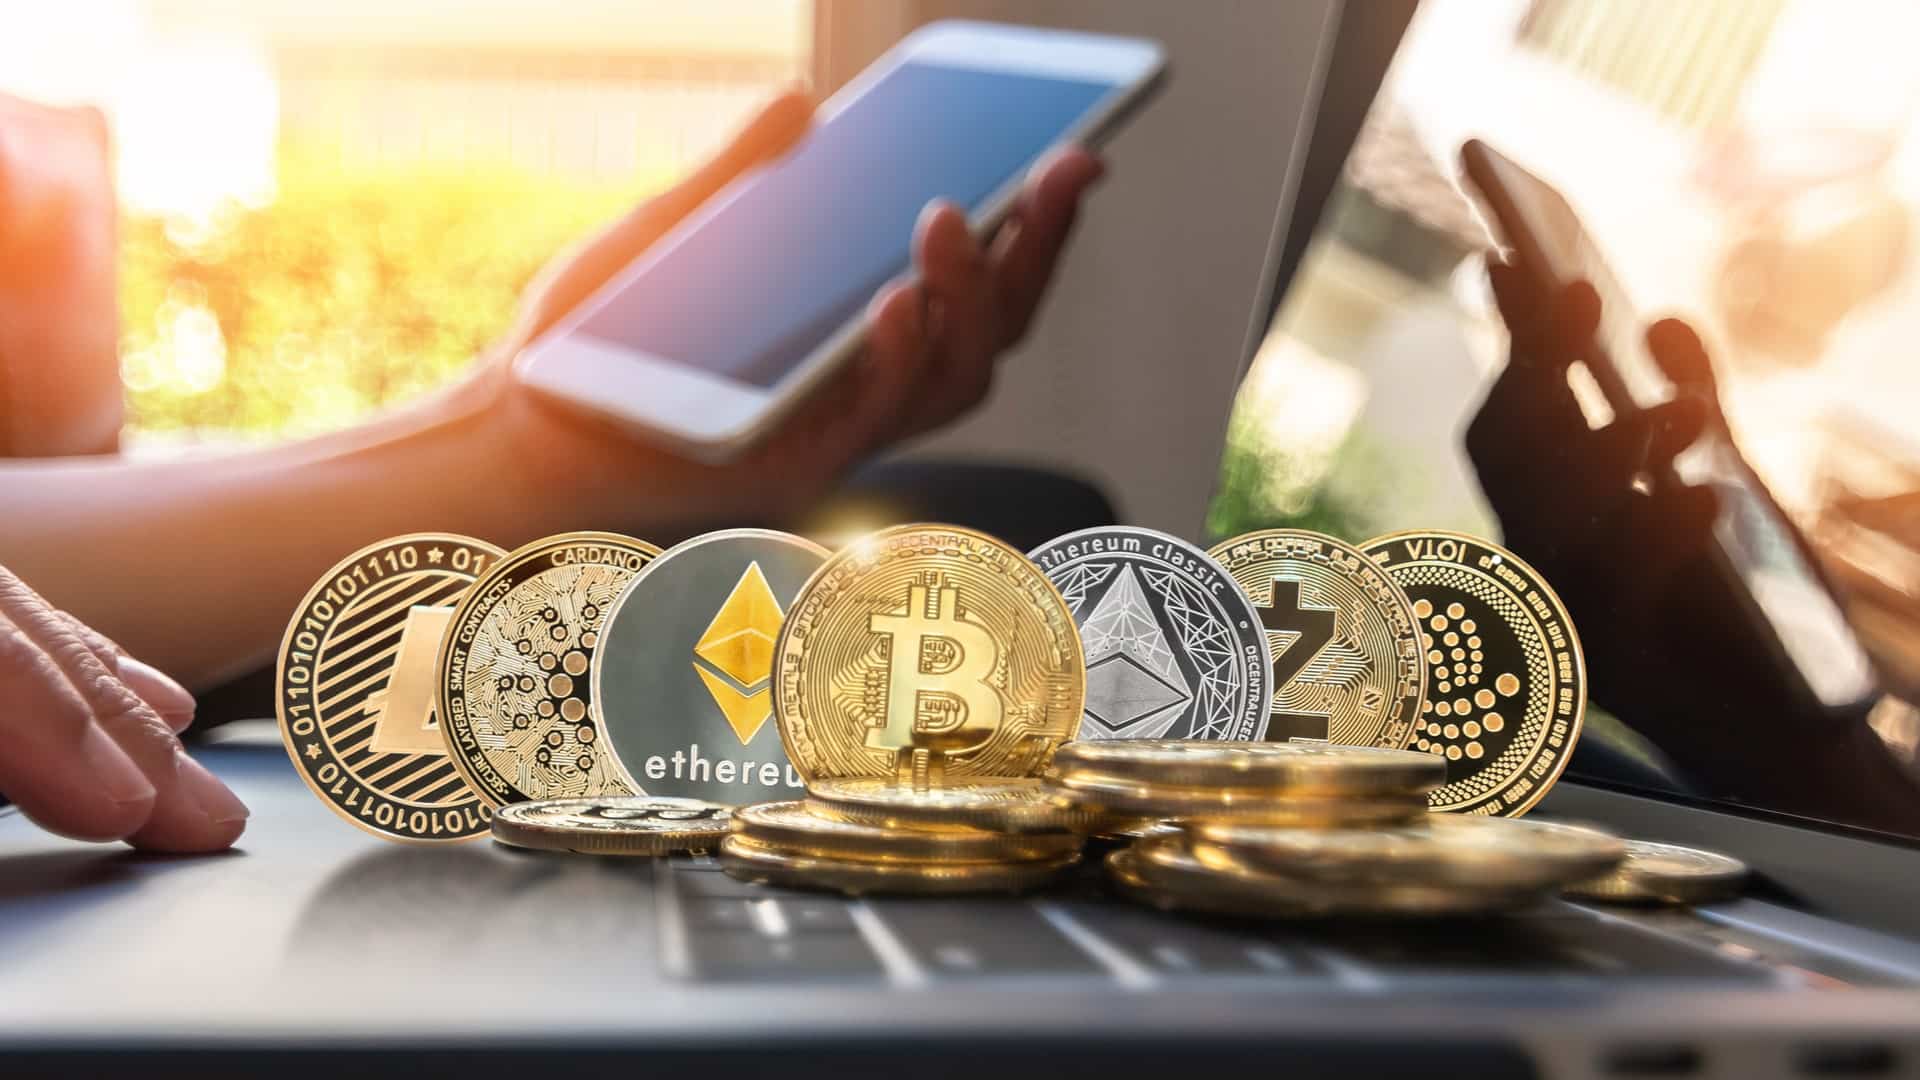 Here are 5 simple factors to help you figure out what cryptocurrencies to invest in